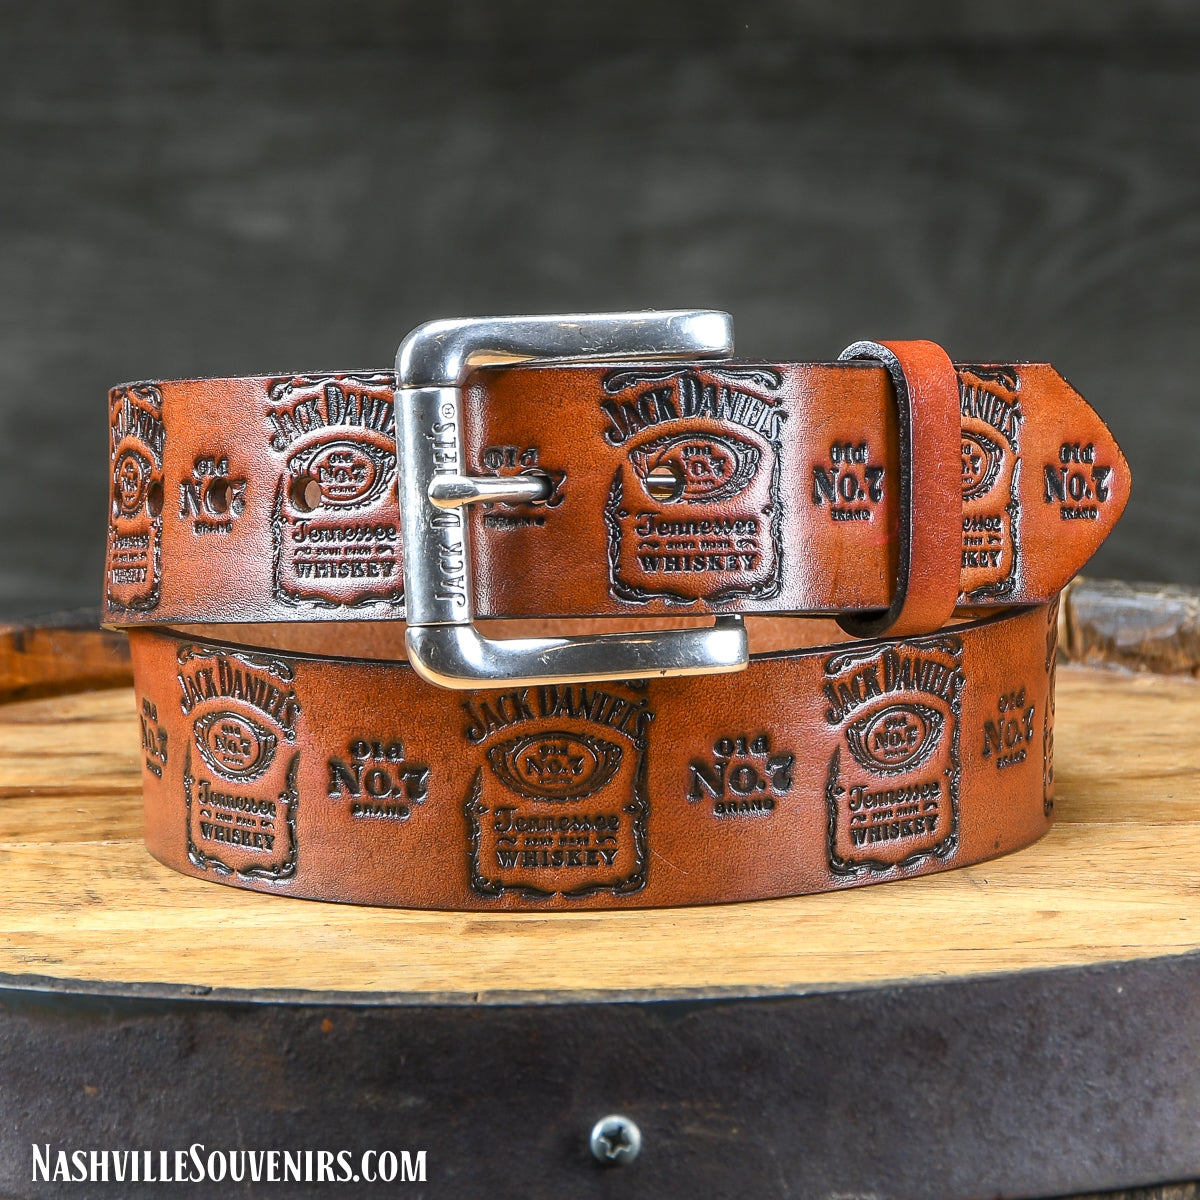 Officially licensed Men's Brown Jack Daniels Logo Stamped Belt with Jack Daniels and Old No.7 Brand logos. Get yours today with FREE SHIPPING on all US orders over $75!